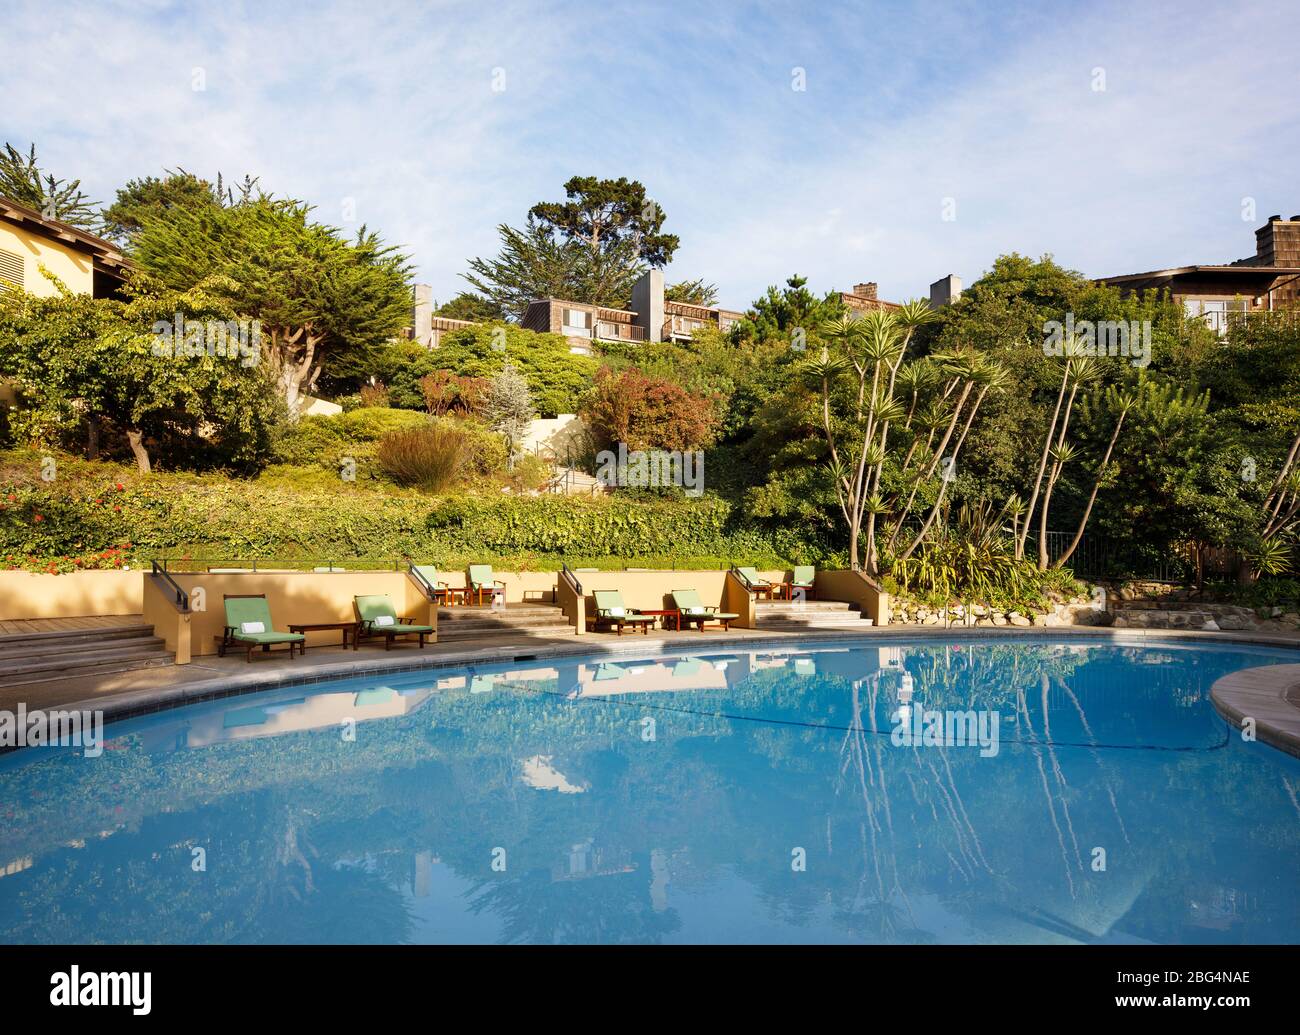 An outdoor swimming pool surrounded by green foliage in Napa Stock Photo